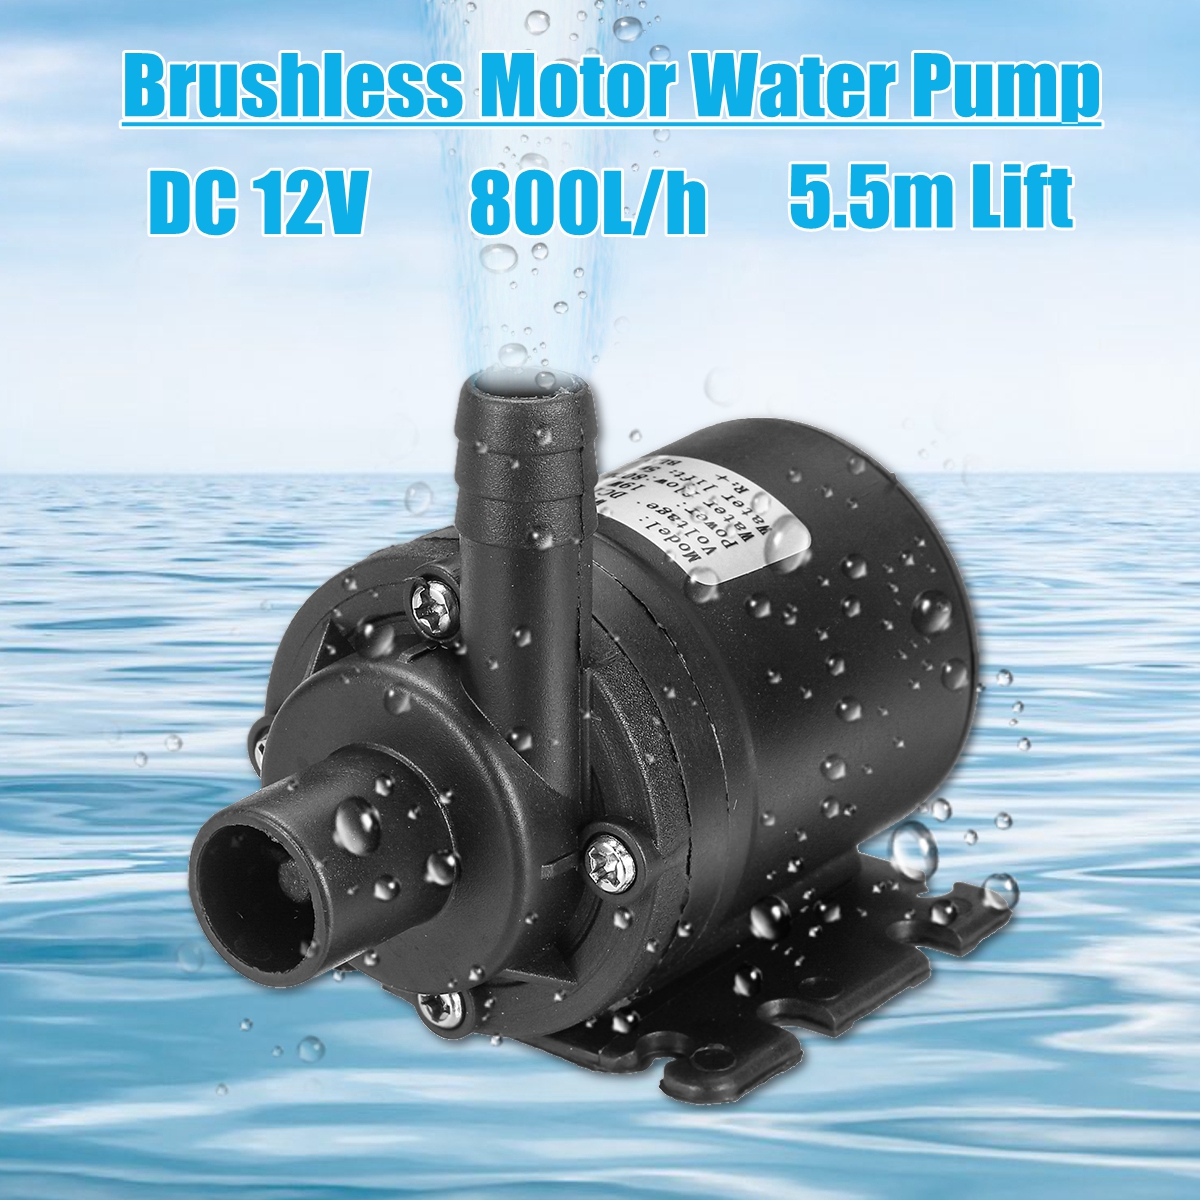 ZYW680-DC-12V-Water-Pump-Ultra-Quiet-Mini-55m-Lift-Brushless-Motor-Submersible-Water-Pump-1531599-3